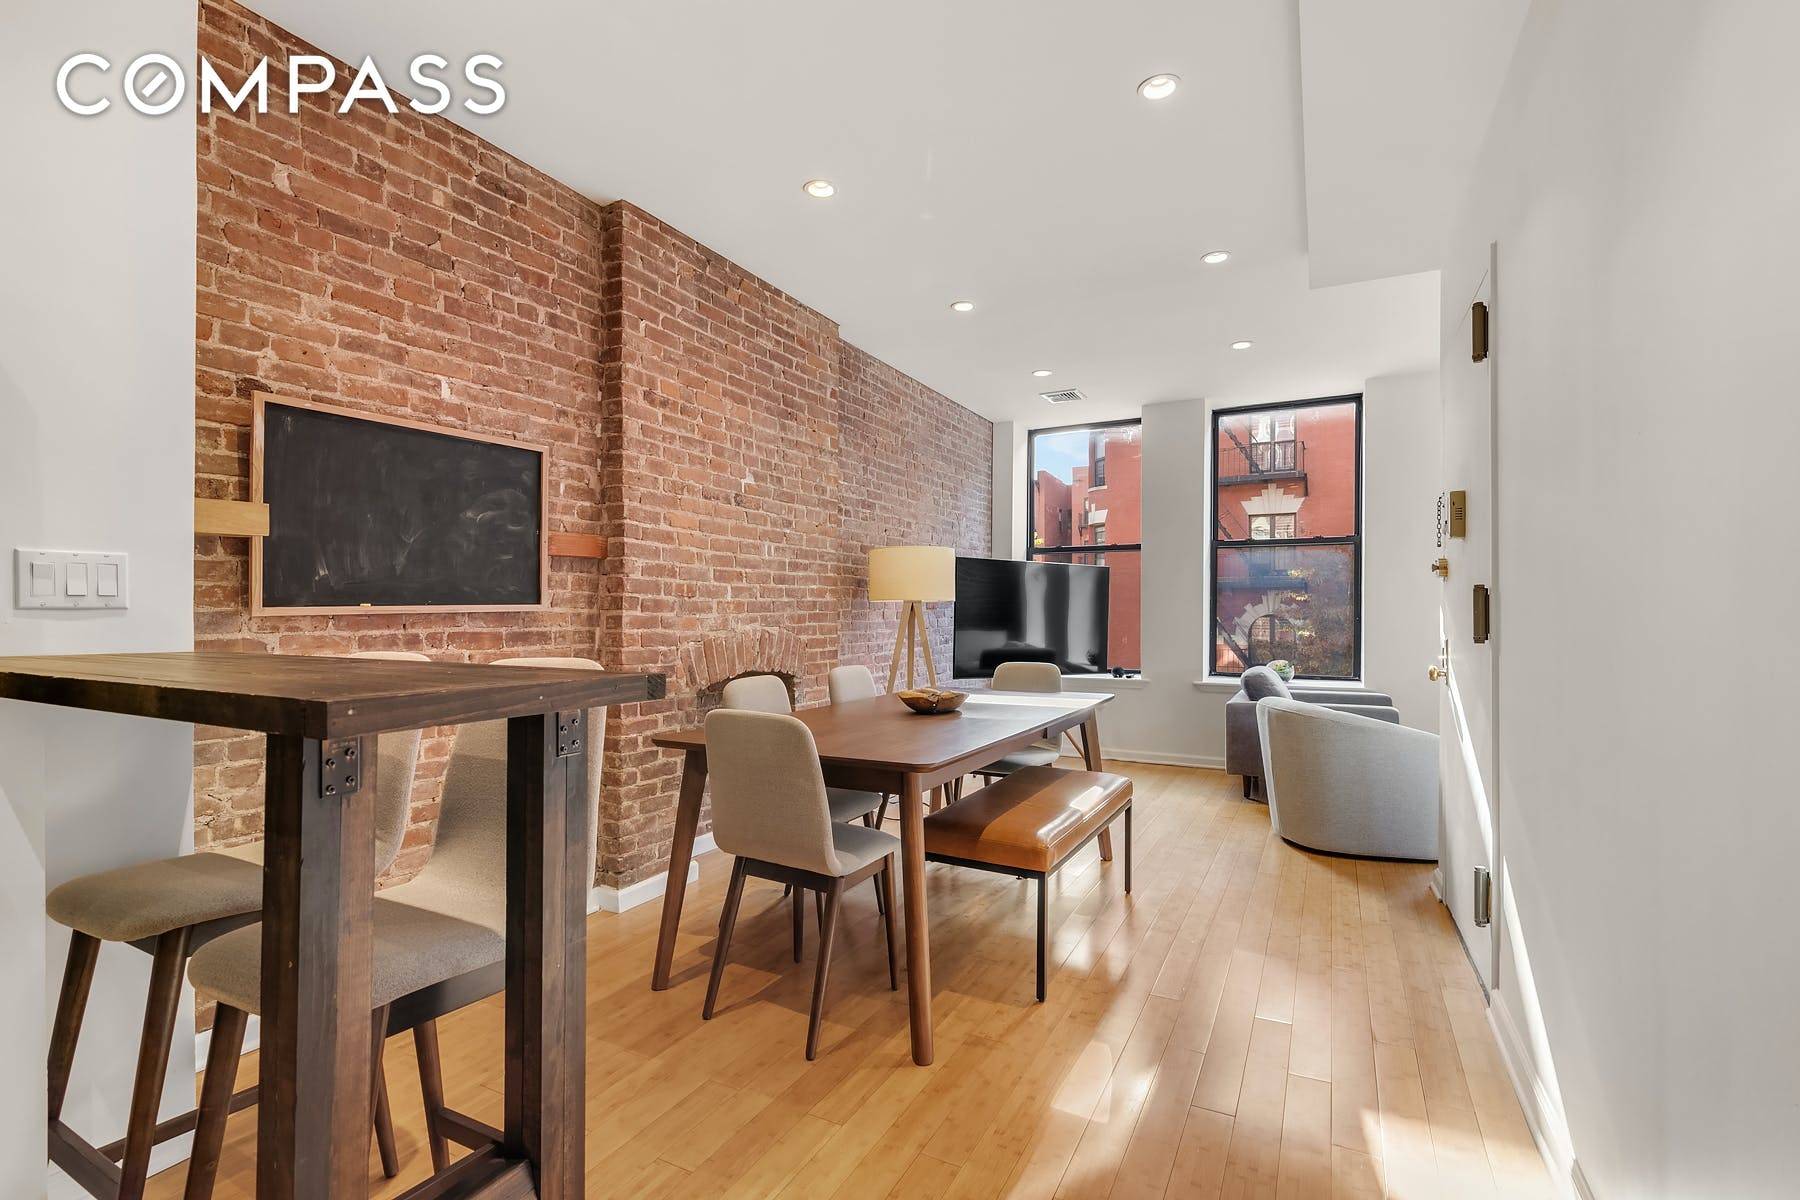 Charming, light filled apartment in a walk up brownstone.